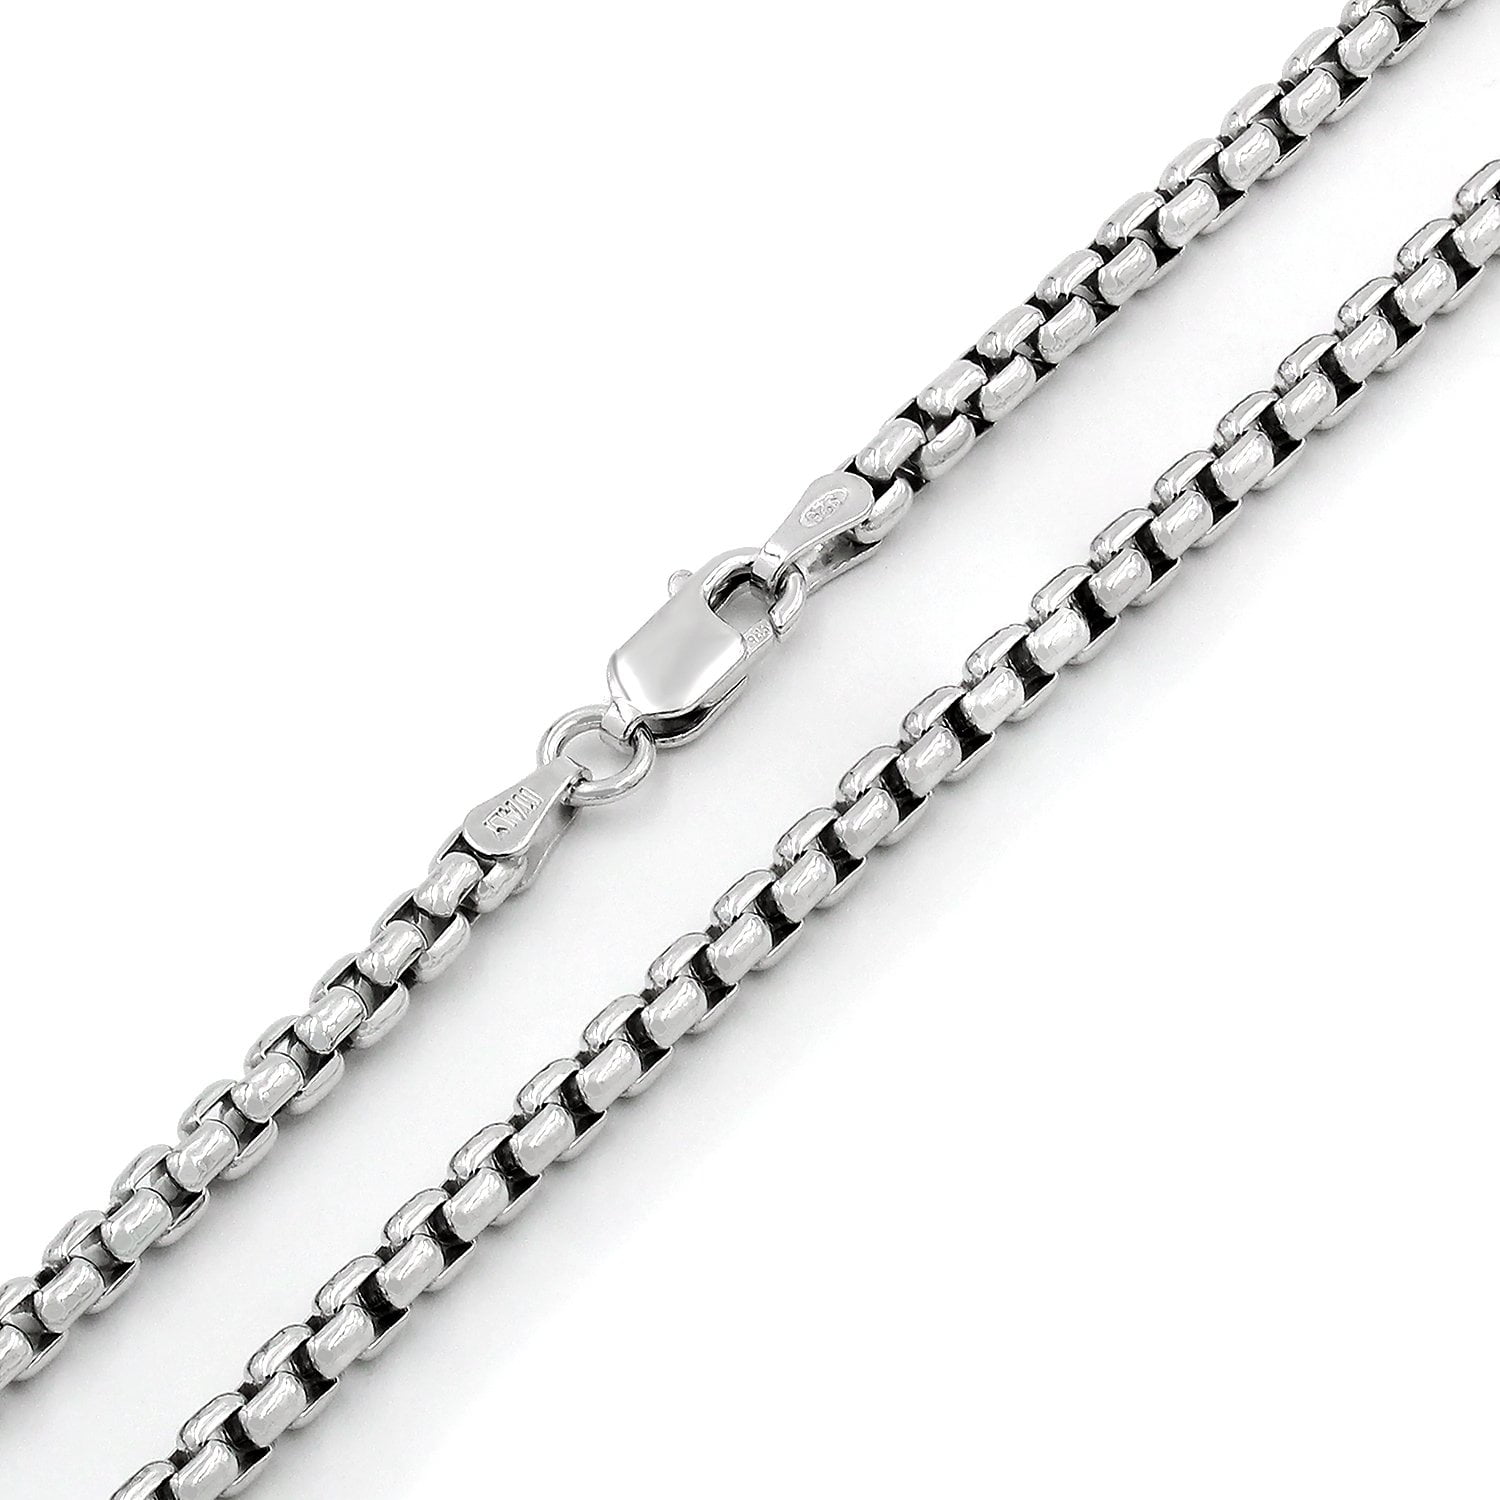 925 Sterling Silver Rhodium-plated 1.5mm Box Chain 